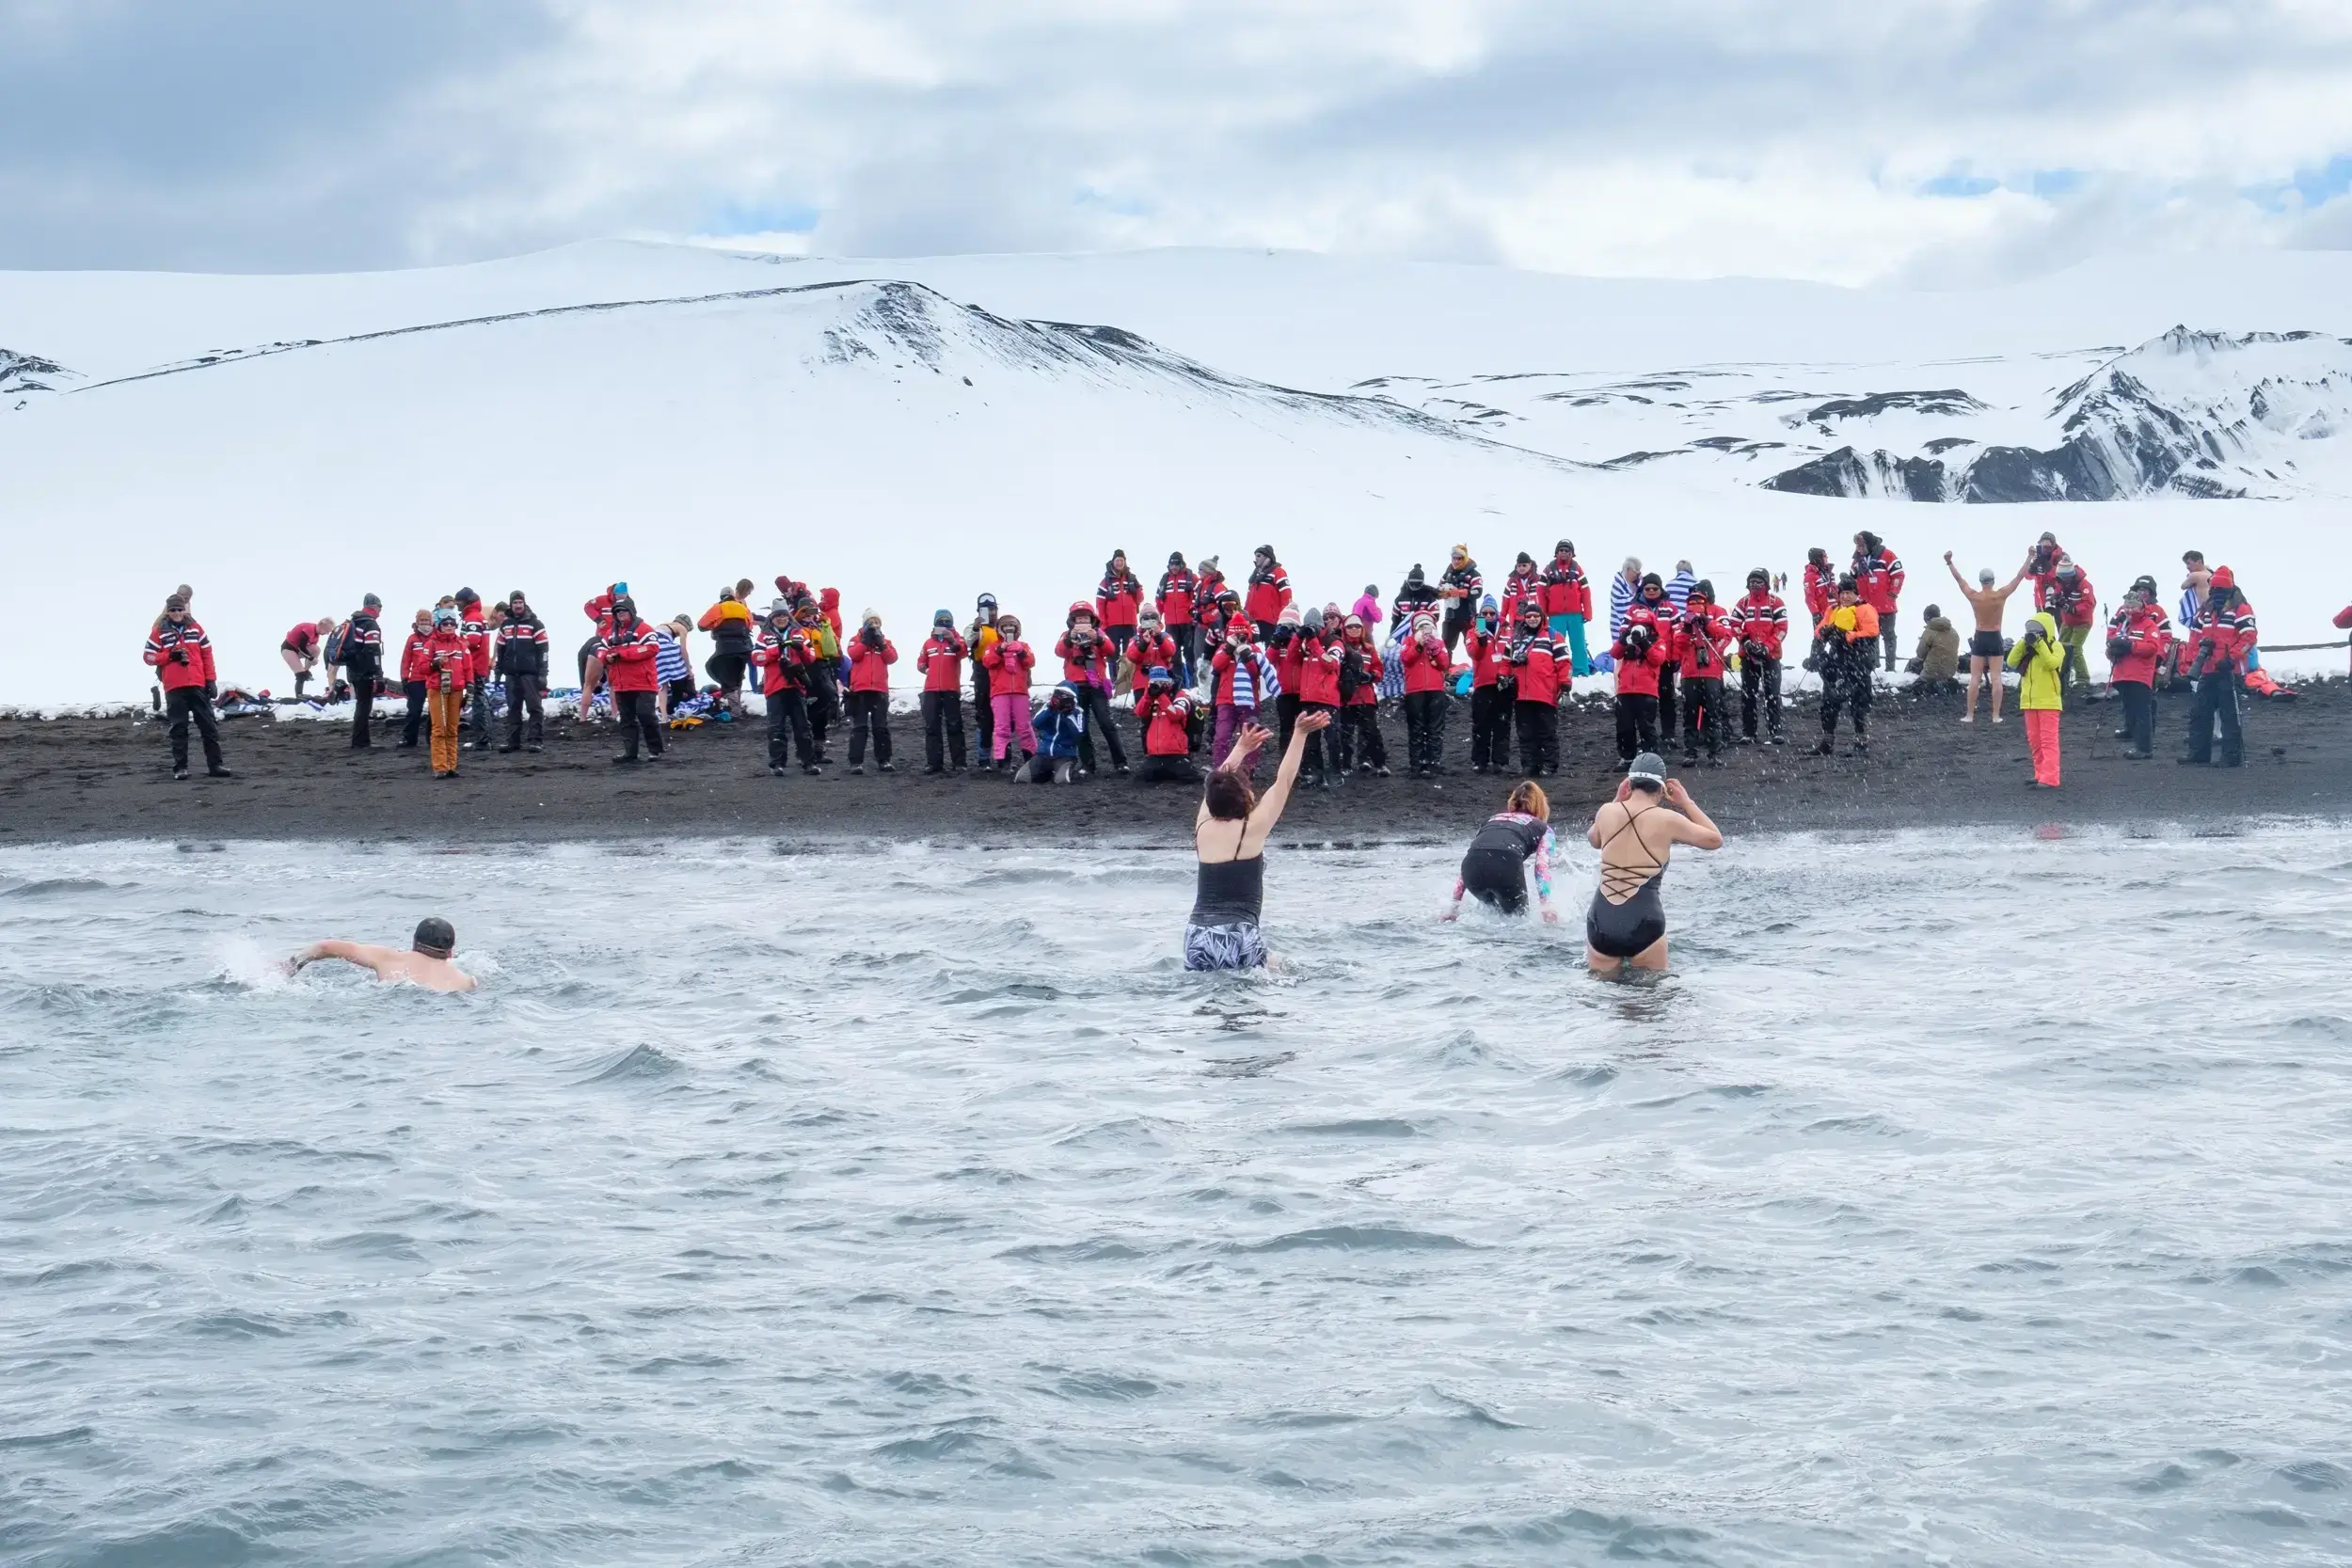 tourists on antarctica cruise vactions are enjoying themselves by doing swimming activity